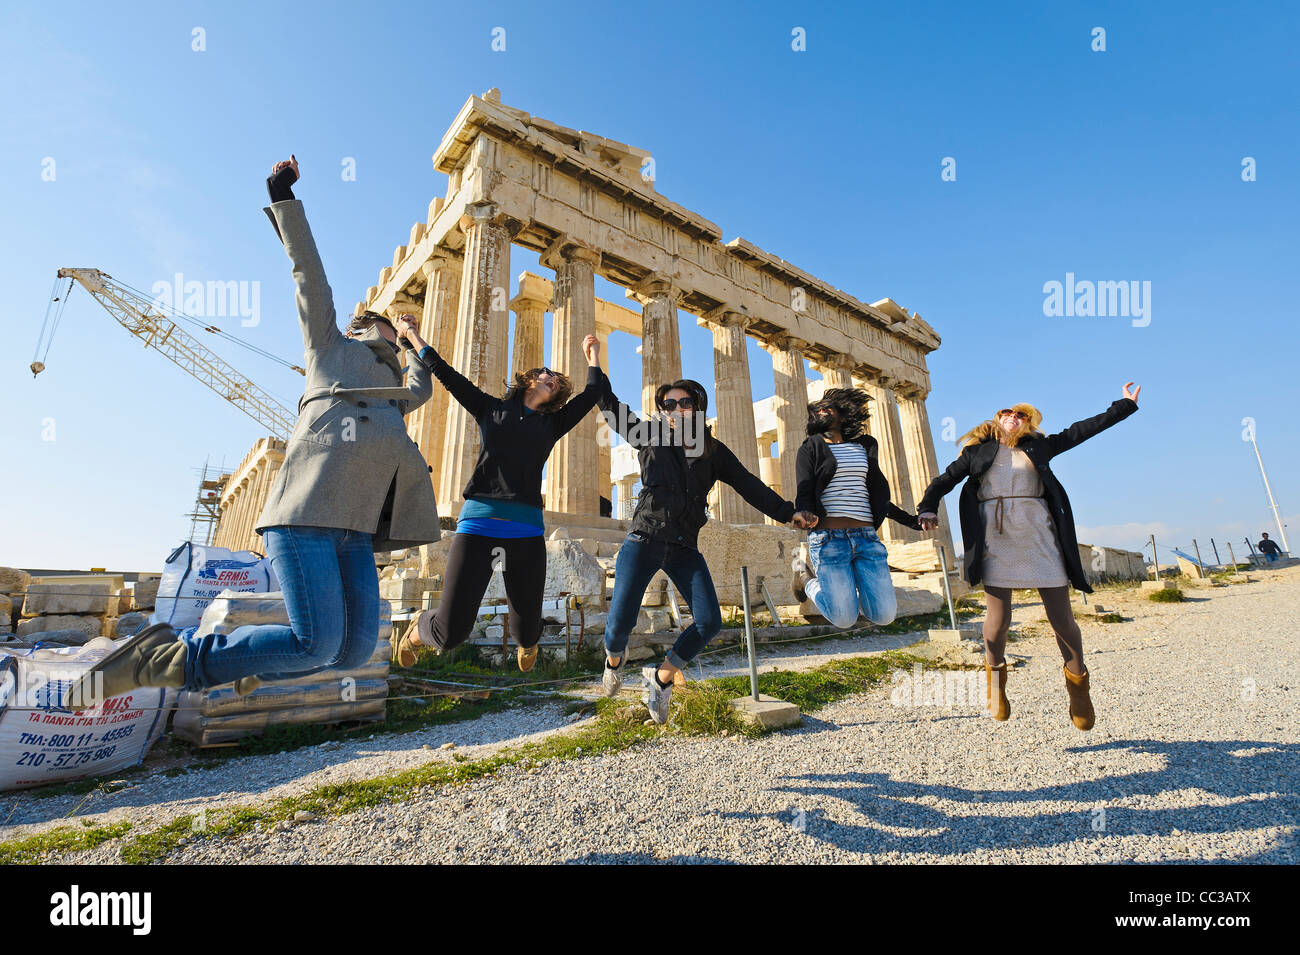 Young women jumping in front of the Parthenon temple, Acropolis, Athens, Greece, Europe Stock Photo